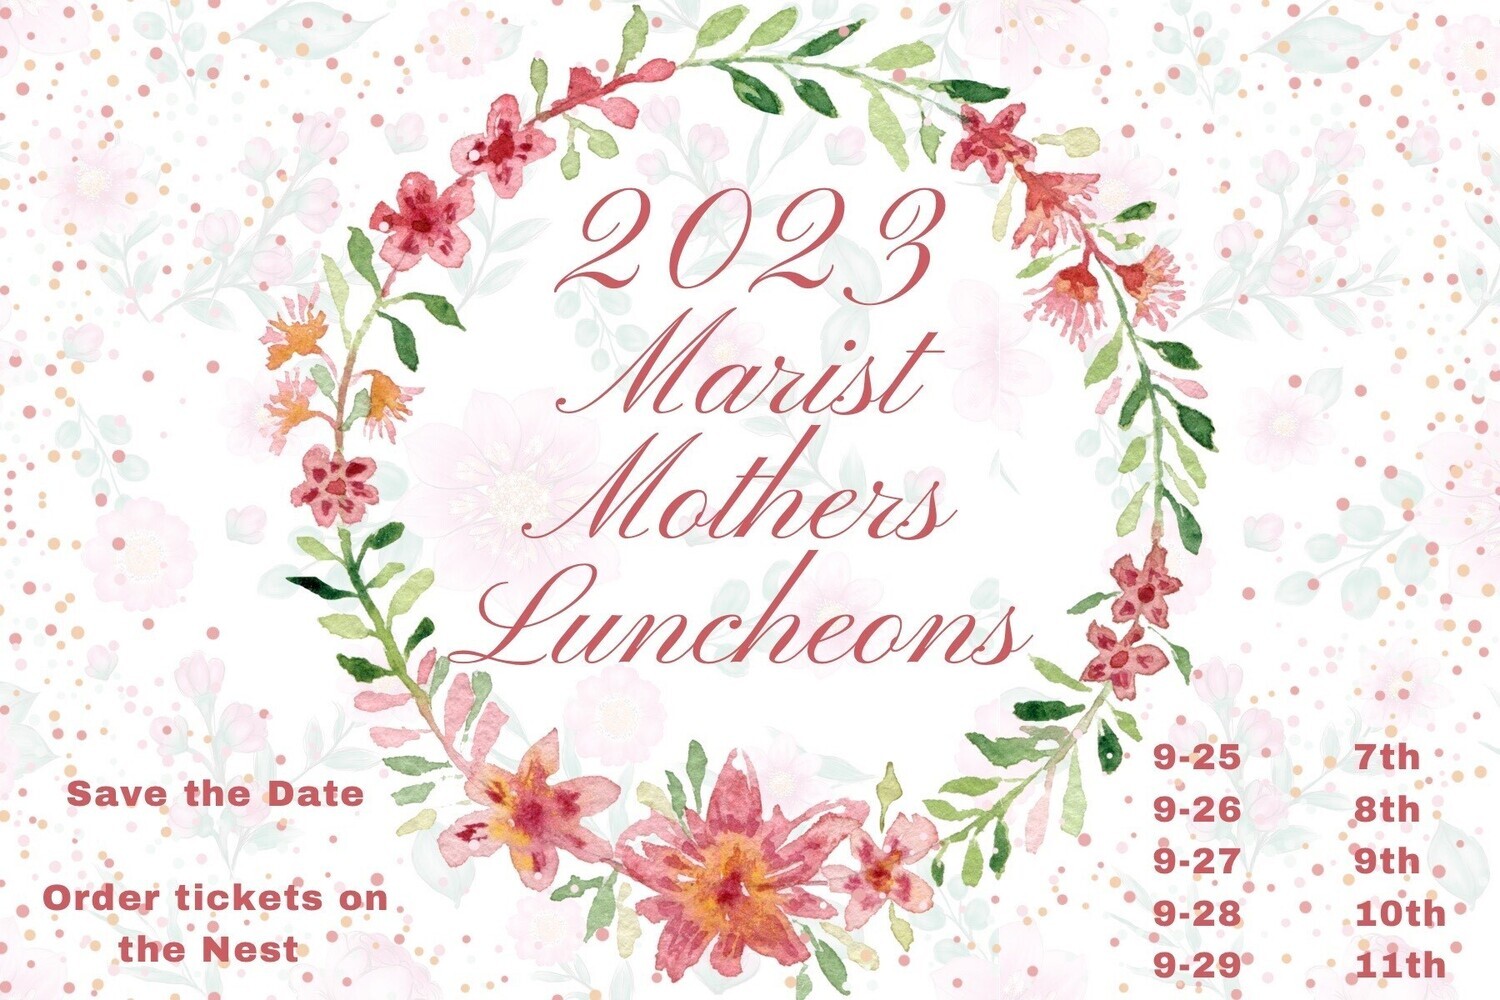 Marist Mothers' Luncheons